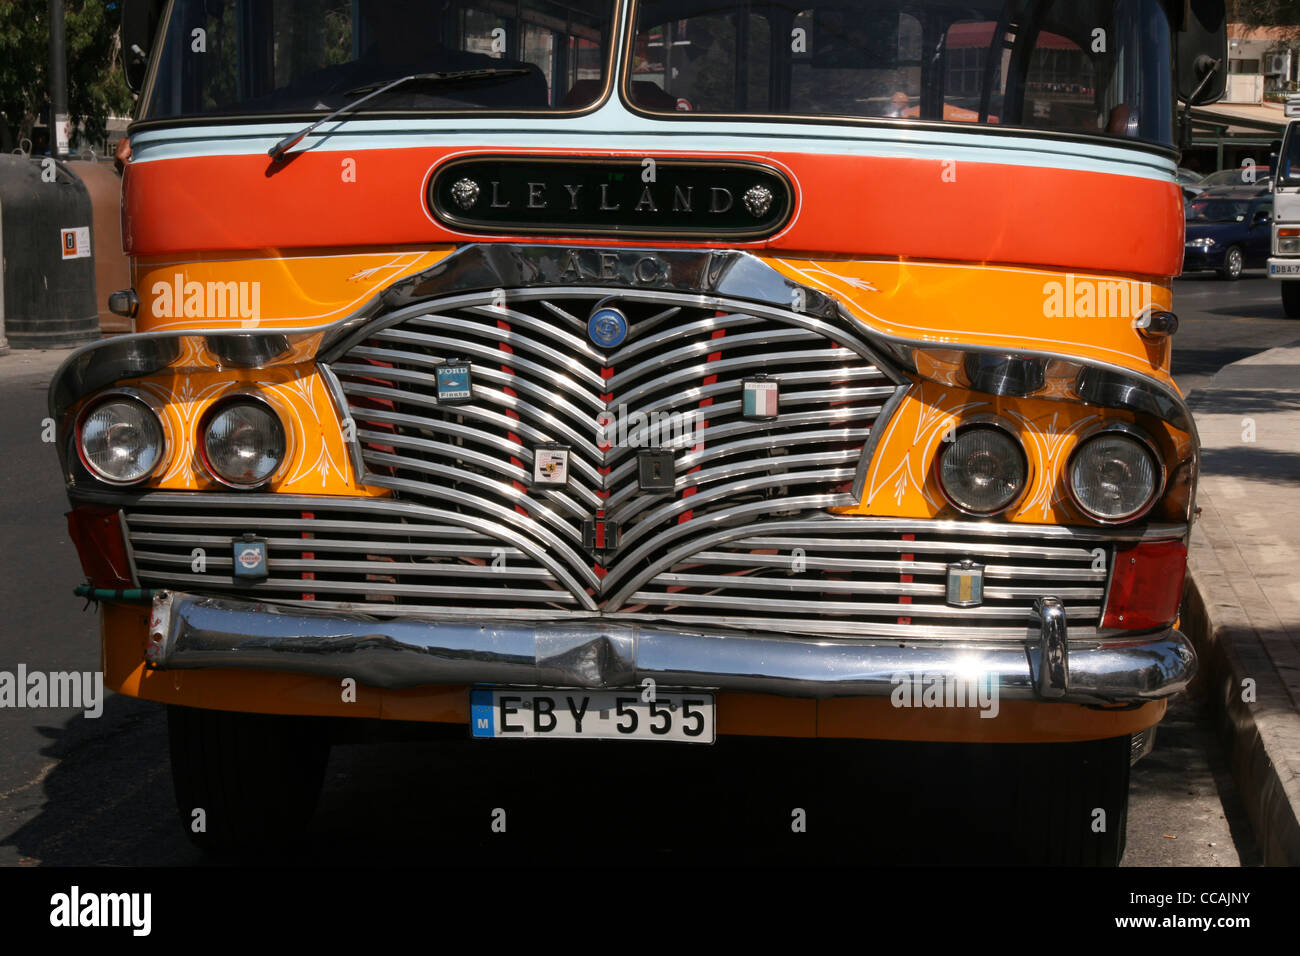 Classic old fashioned Malta bus in traditional colour of yellow and orange with white roof and chrome radiator grille. Stock Photo